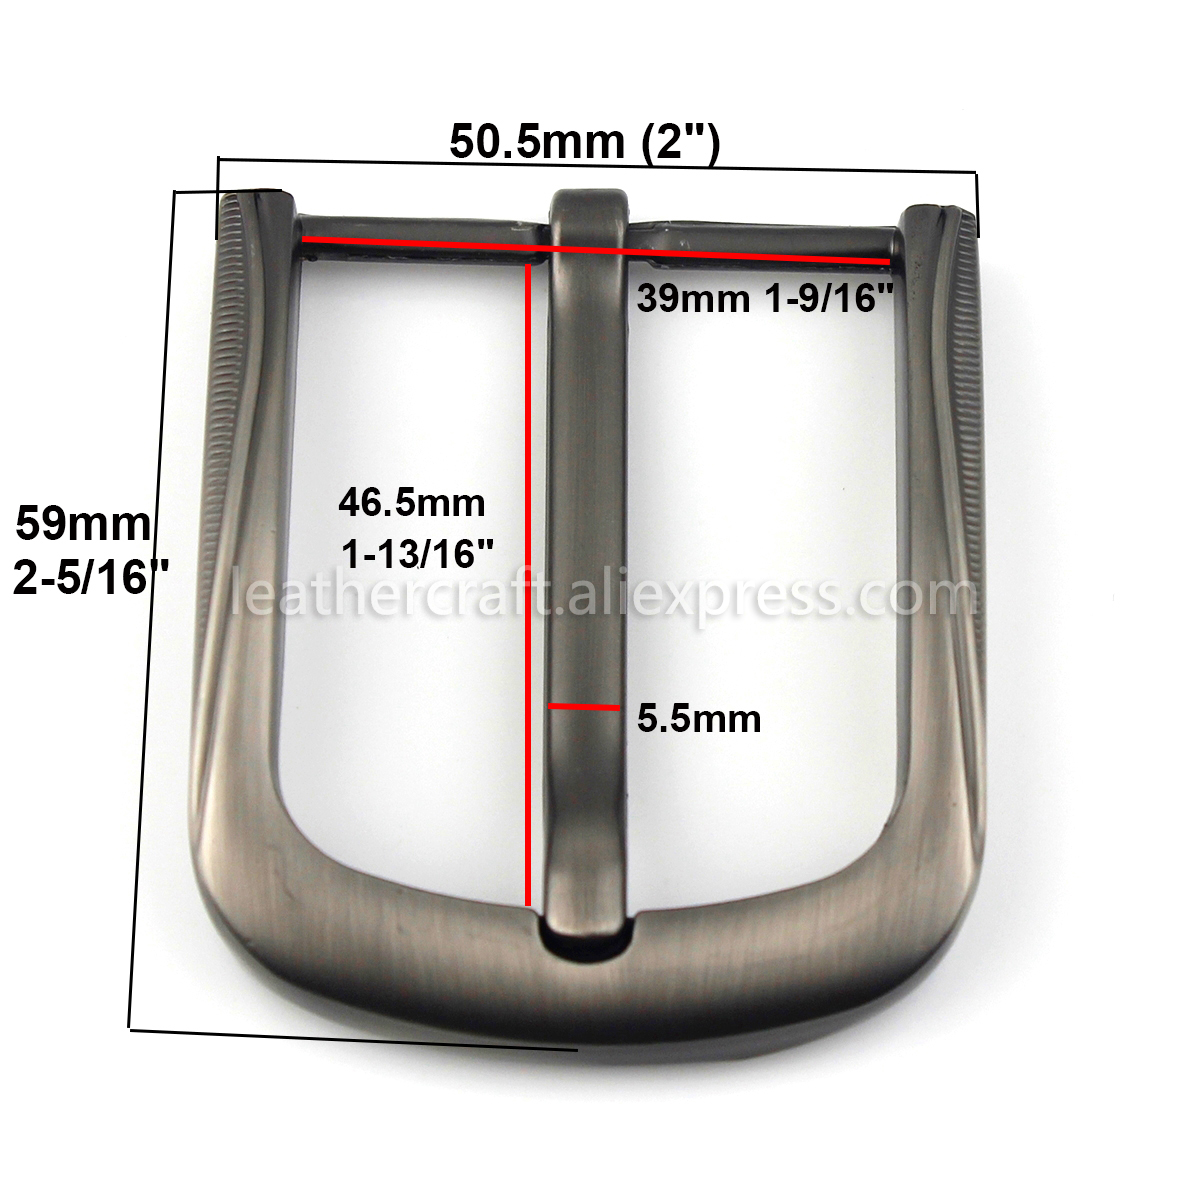 1x 40mm Solid Brushed Metal Belt Buckles Men Women Fashion Single Pin Buckles For 37mm-39mm Belt Leather Craft Jeans Accessory